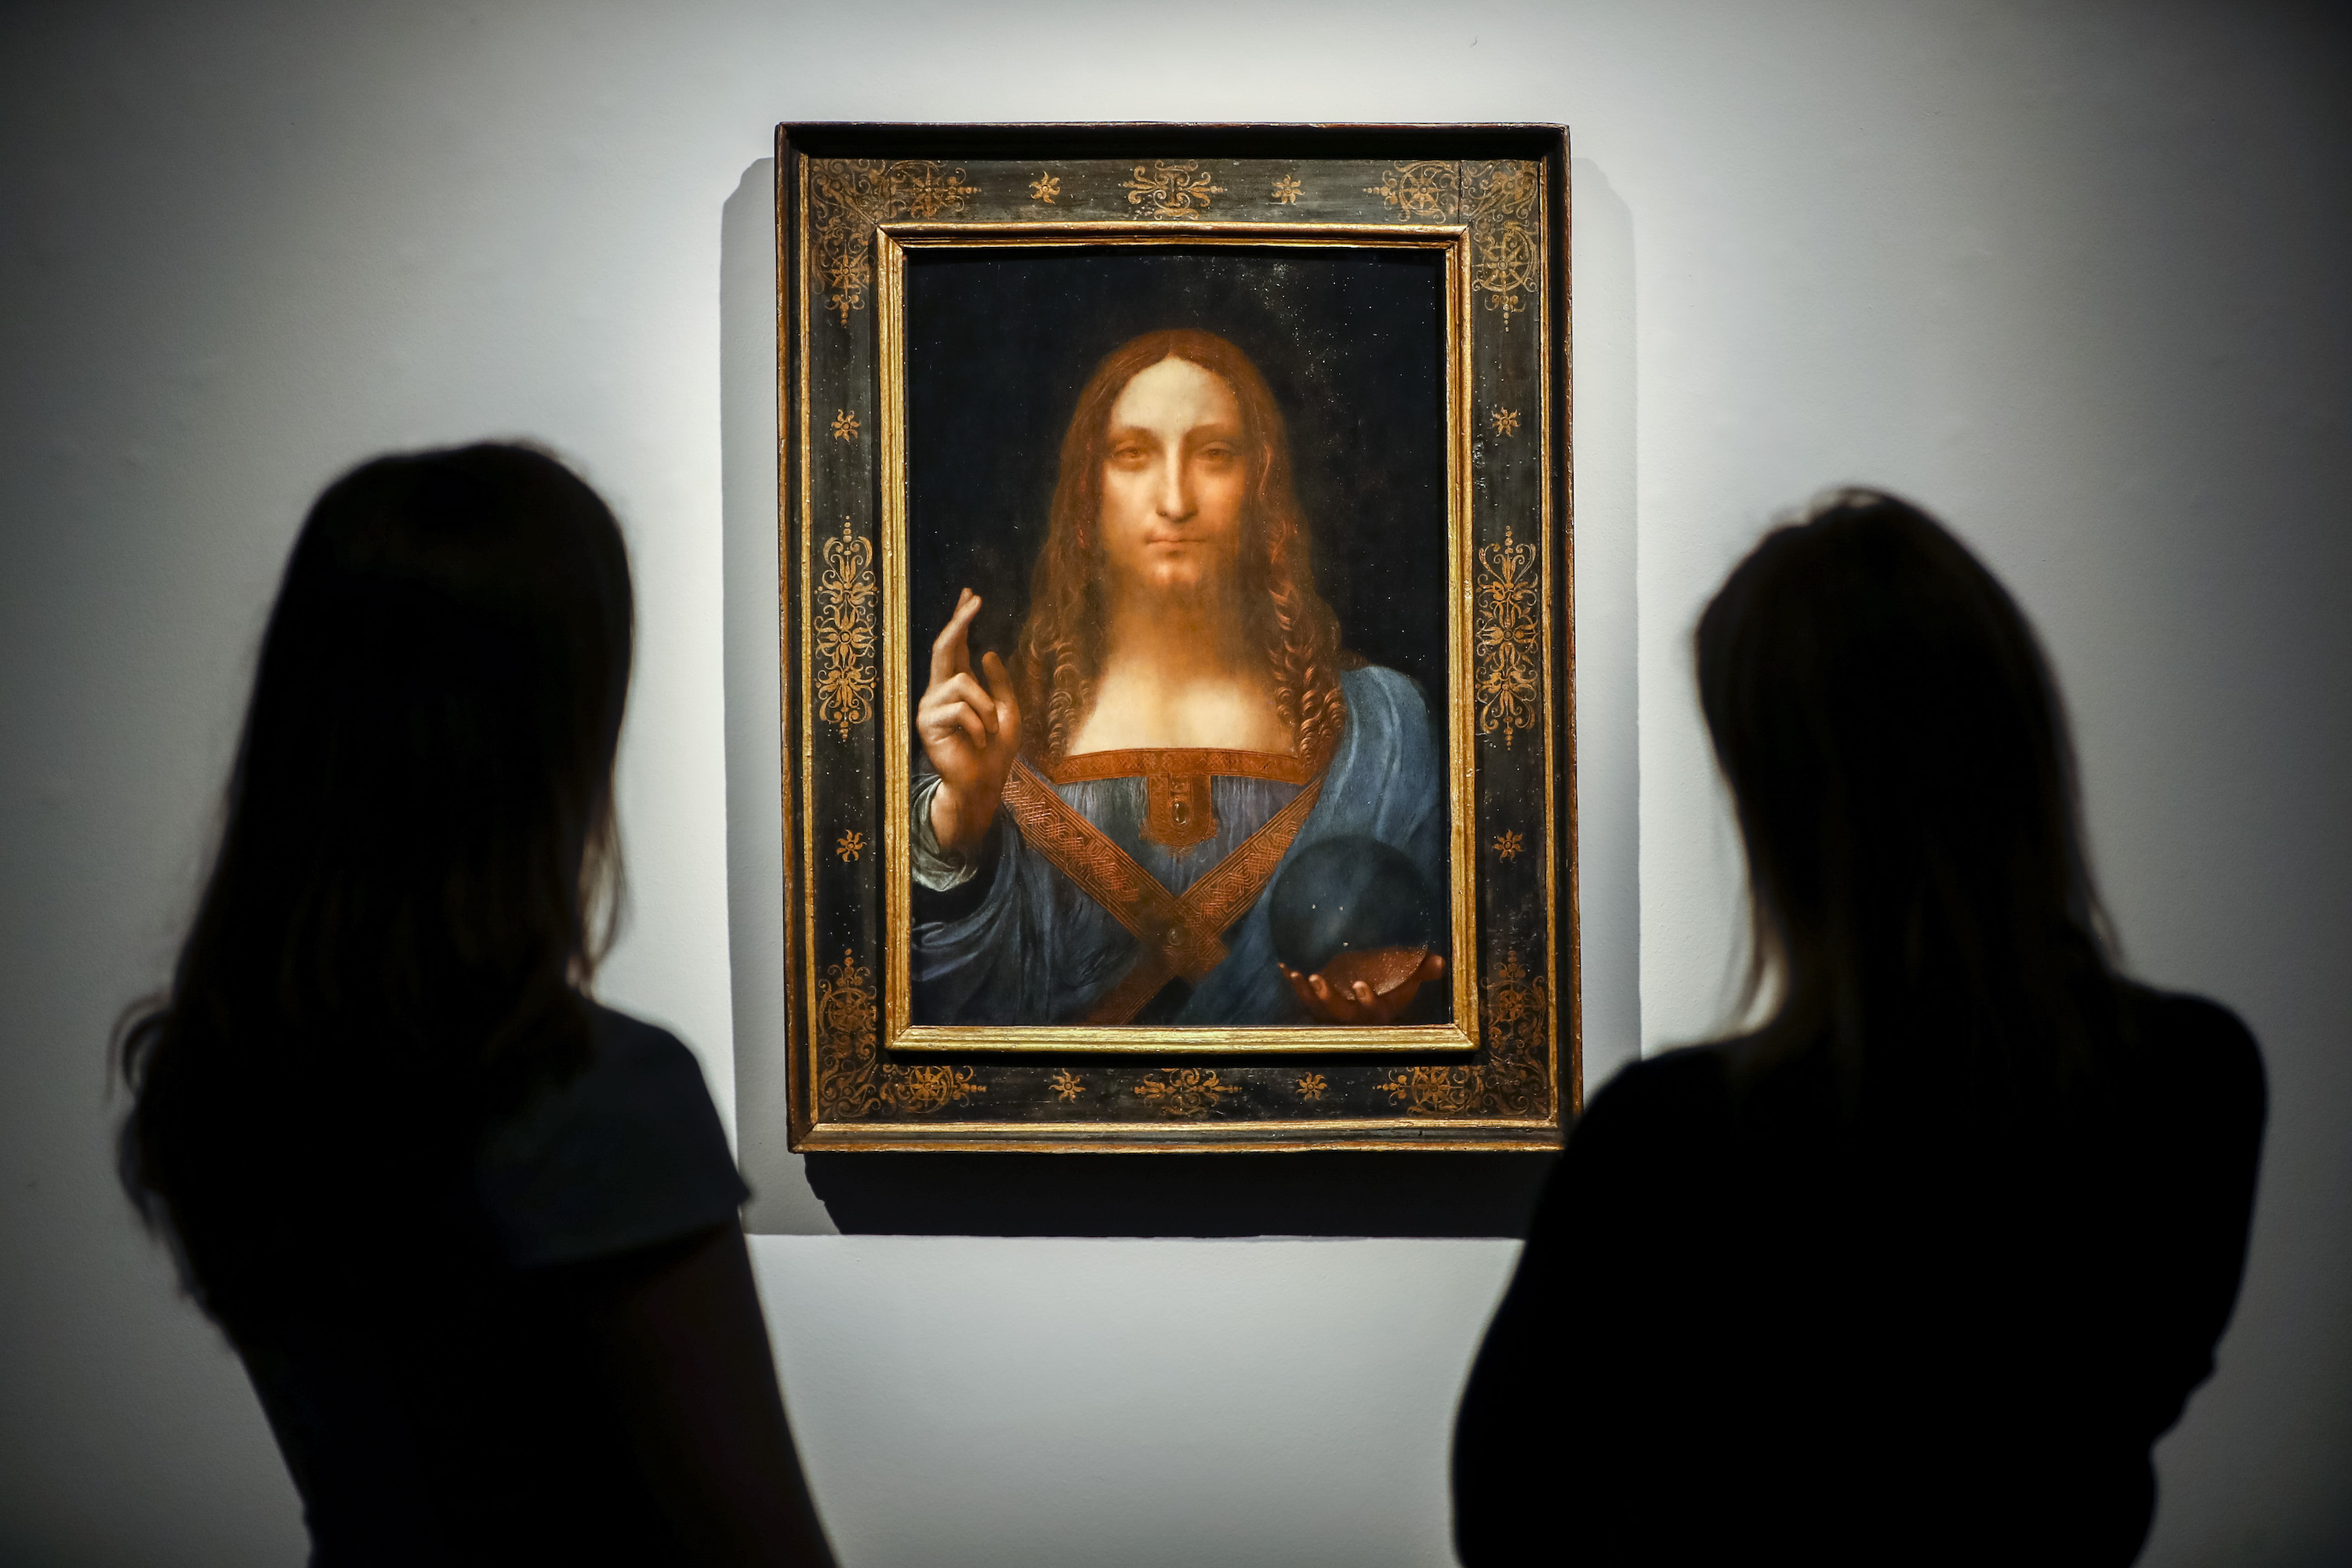 Christie's employees pose in front of Salvator Mundi by Italian polymath Leonardo da Vinci at Christie's auction house in central London on October 22, 2017. The painting was lost in the US for many decades. (Photo by TOLGA AKMEN/AFP/Getty Images).